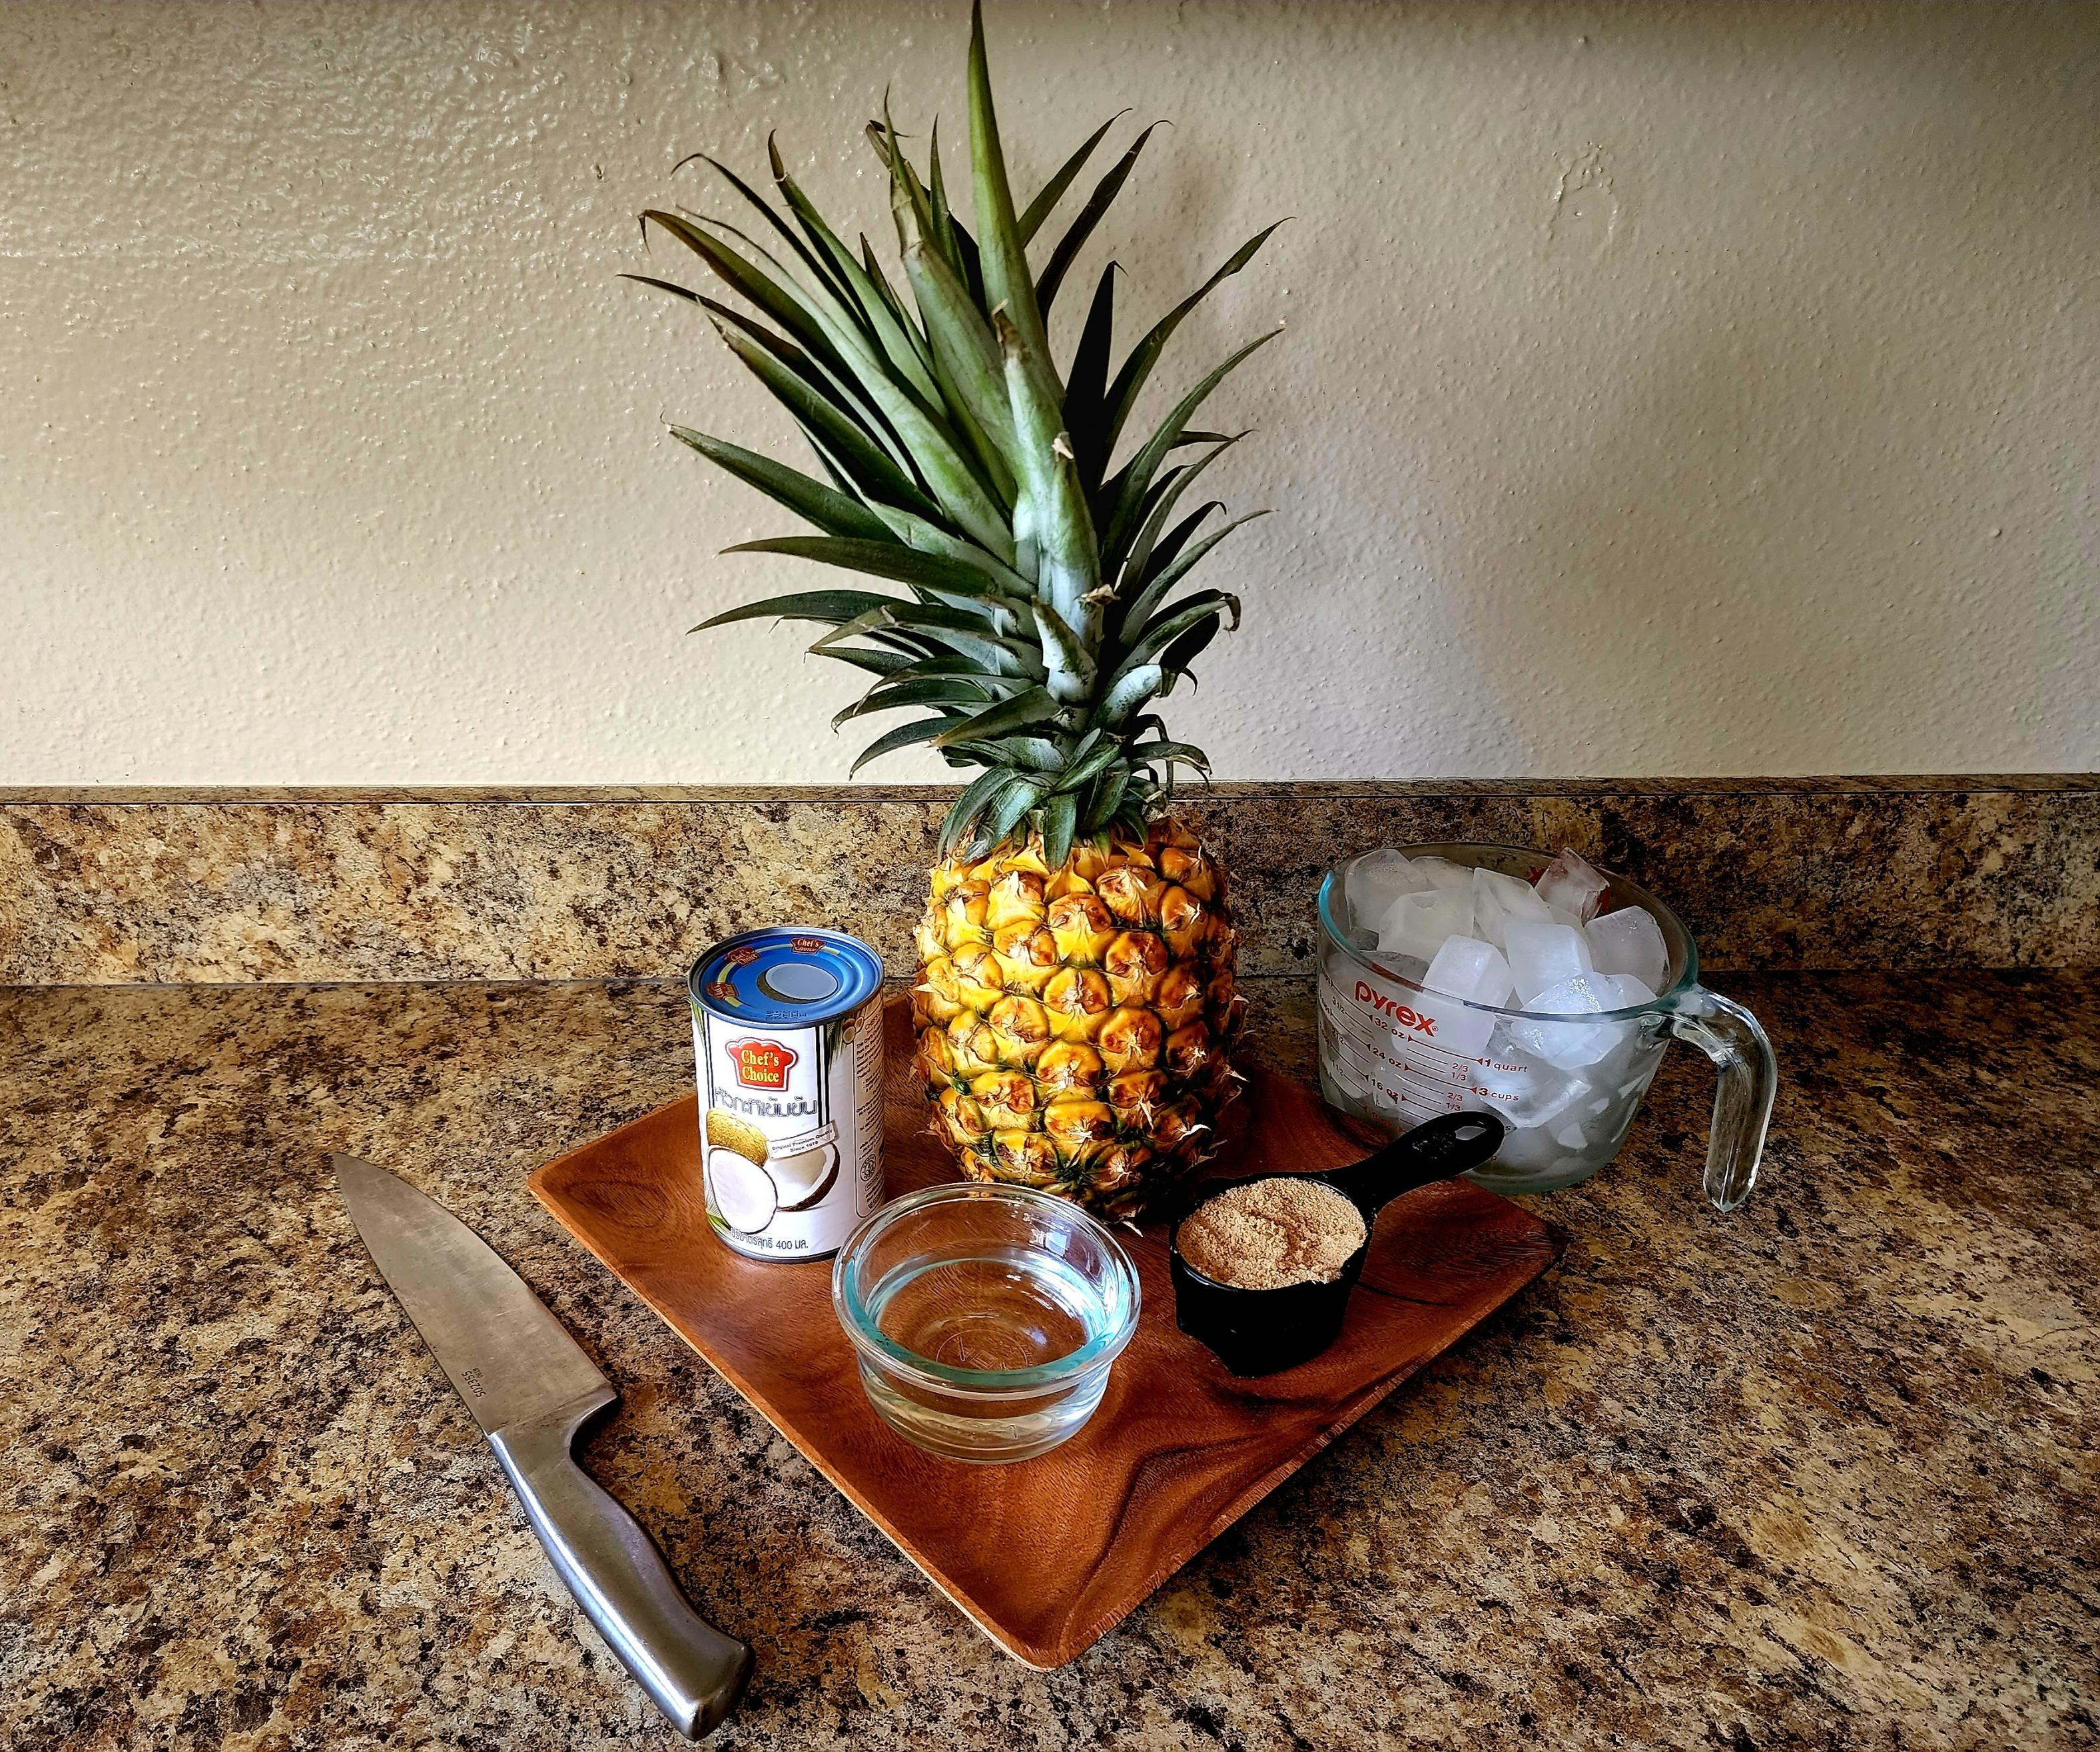 photo of ingredients to make vaifala Samoa. Ingredients include a 1/2 cup of water, 1/2 cup of sugar, 1 can of coconut cream, 1 whole pineapple and ice blocks.